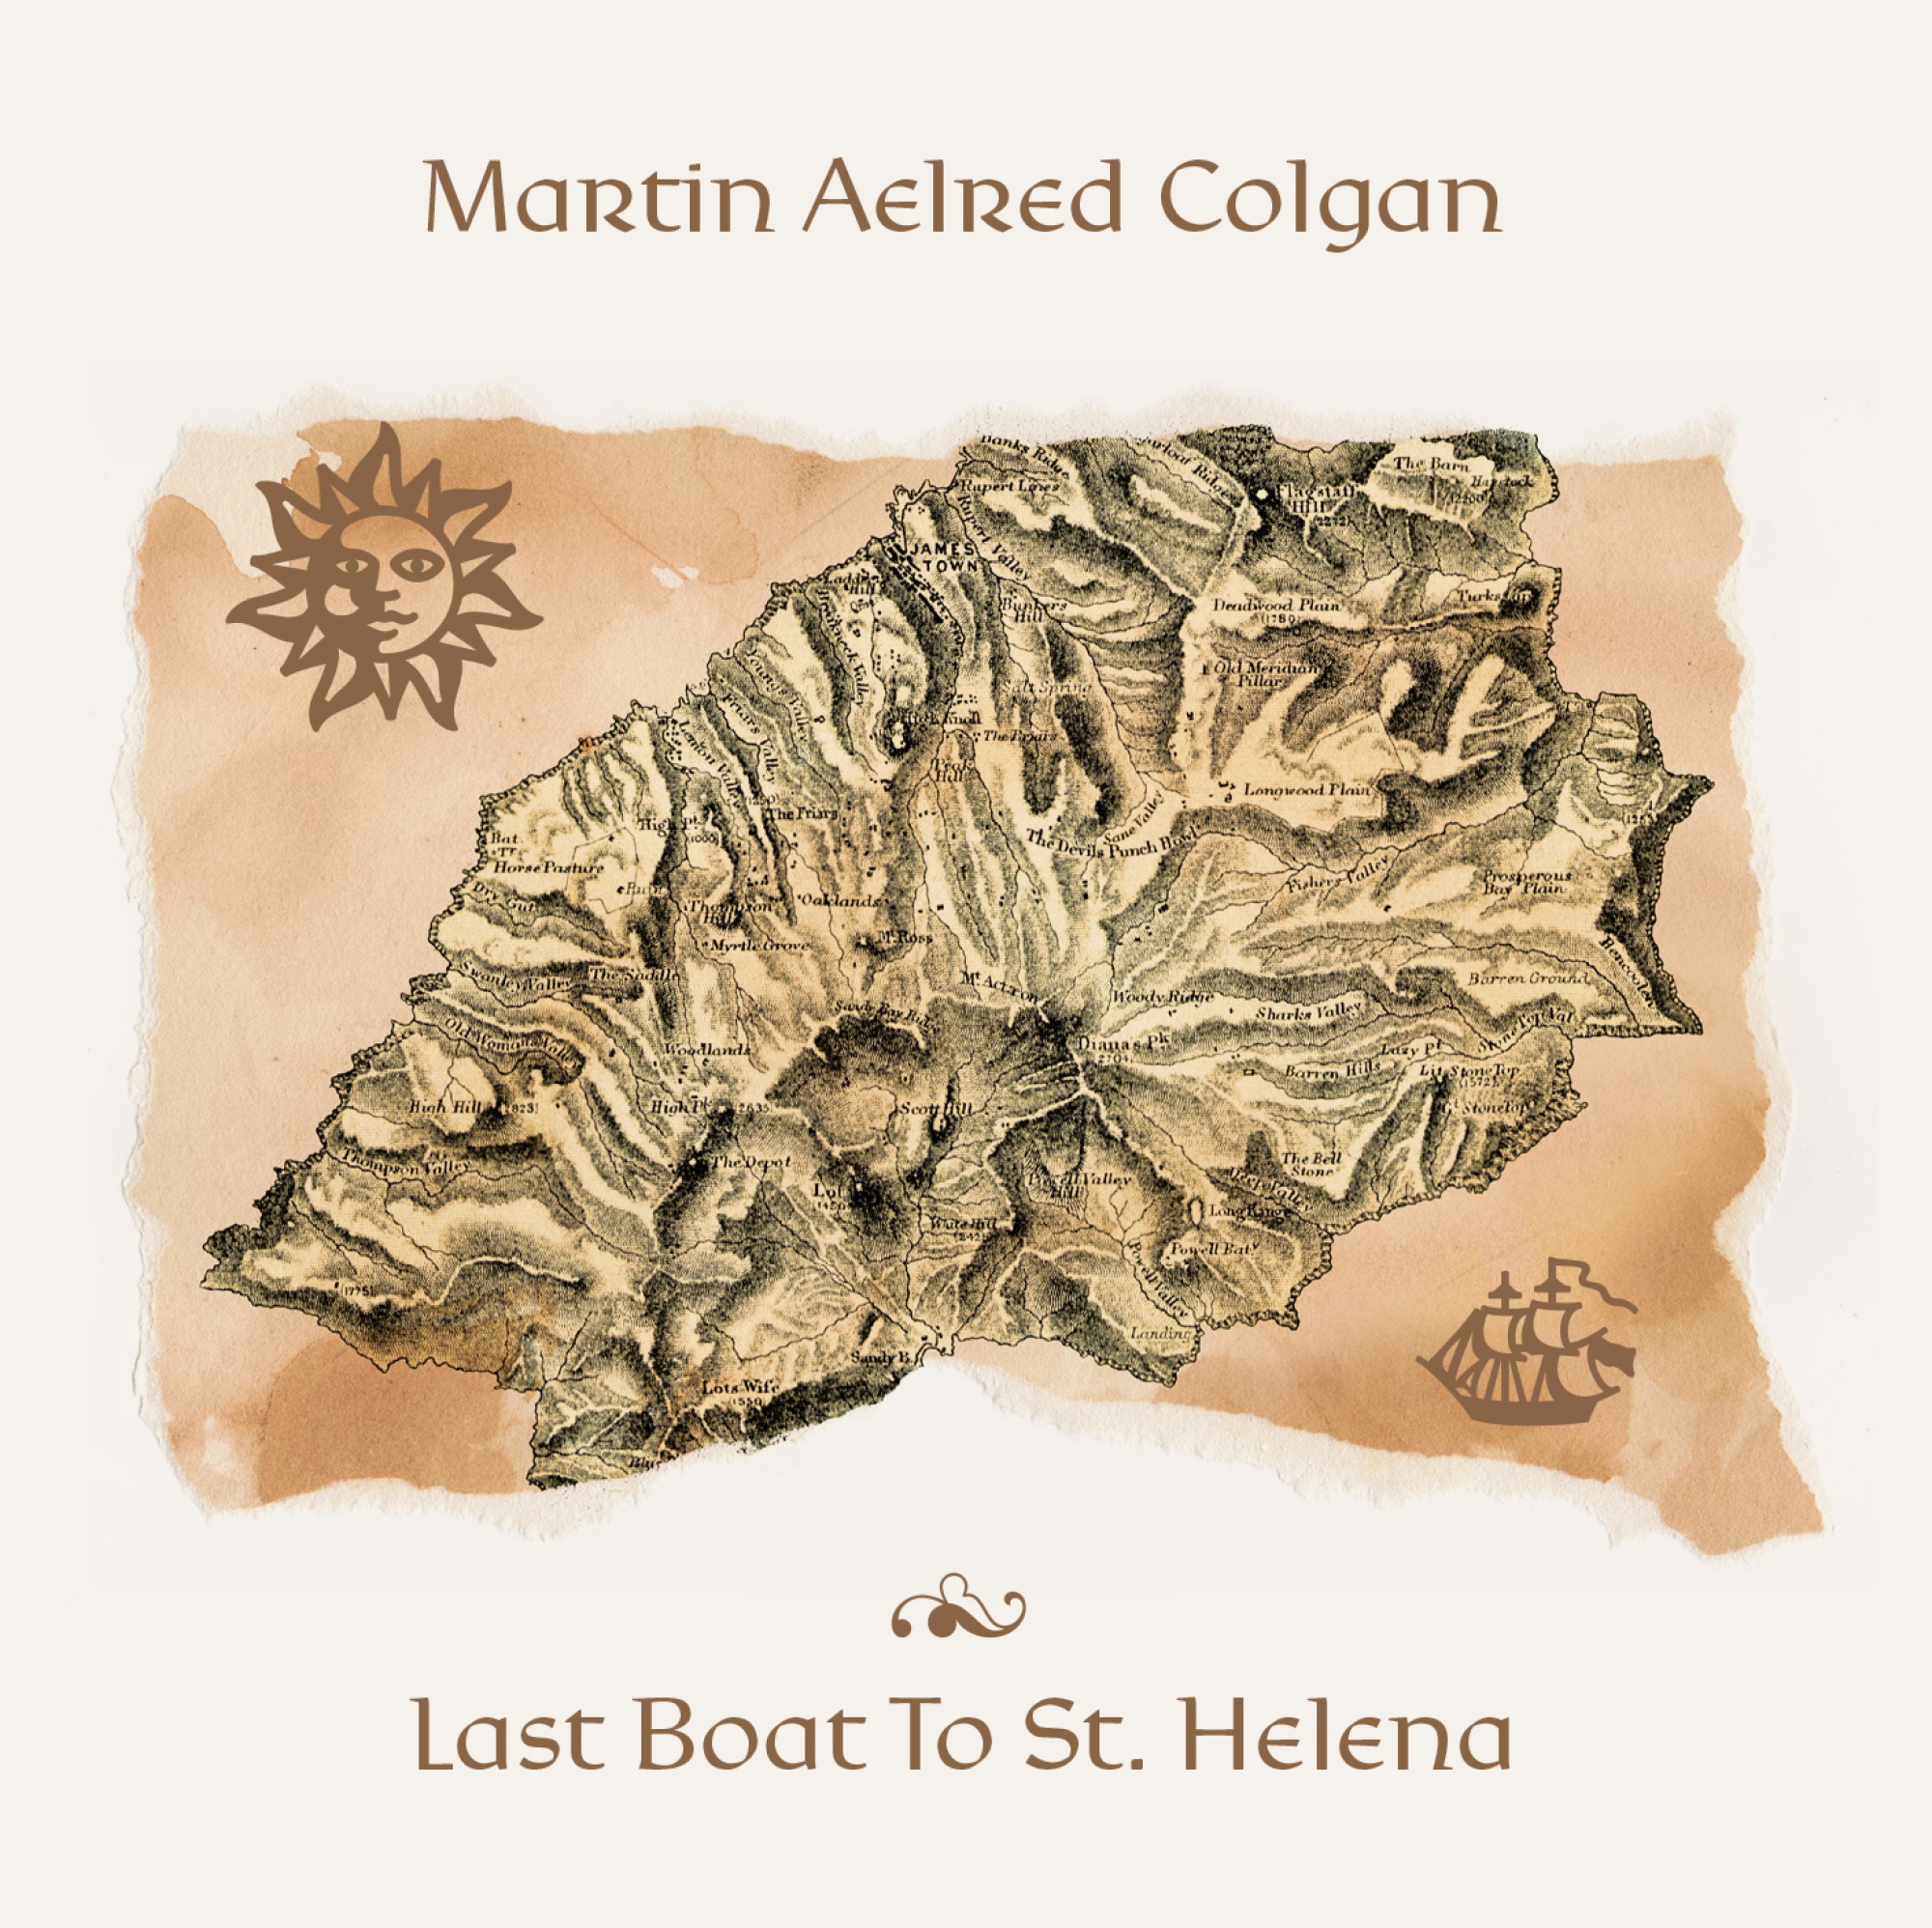 LOCKDOWN ISOLATION INSPIRES MUSICIAN TO MARK THE SAILING OF THE LAST BOAT TO ST HELENA